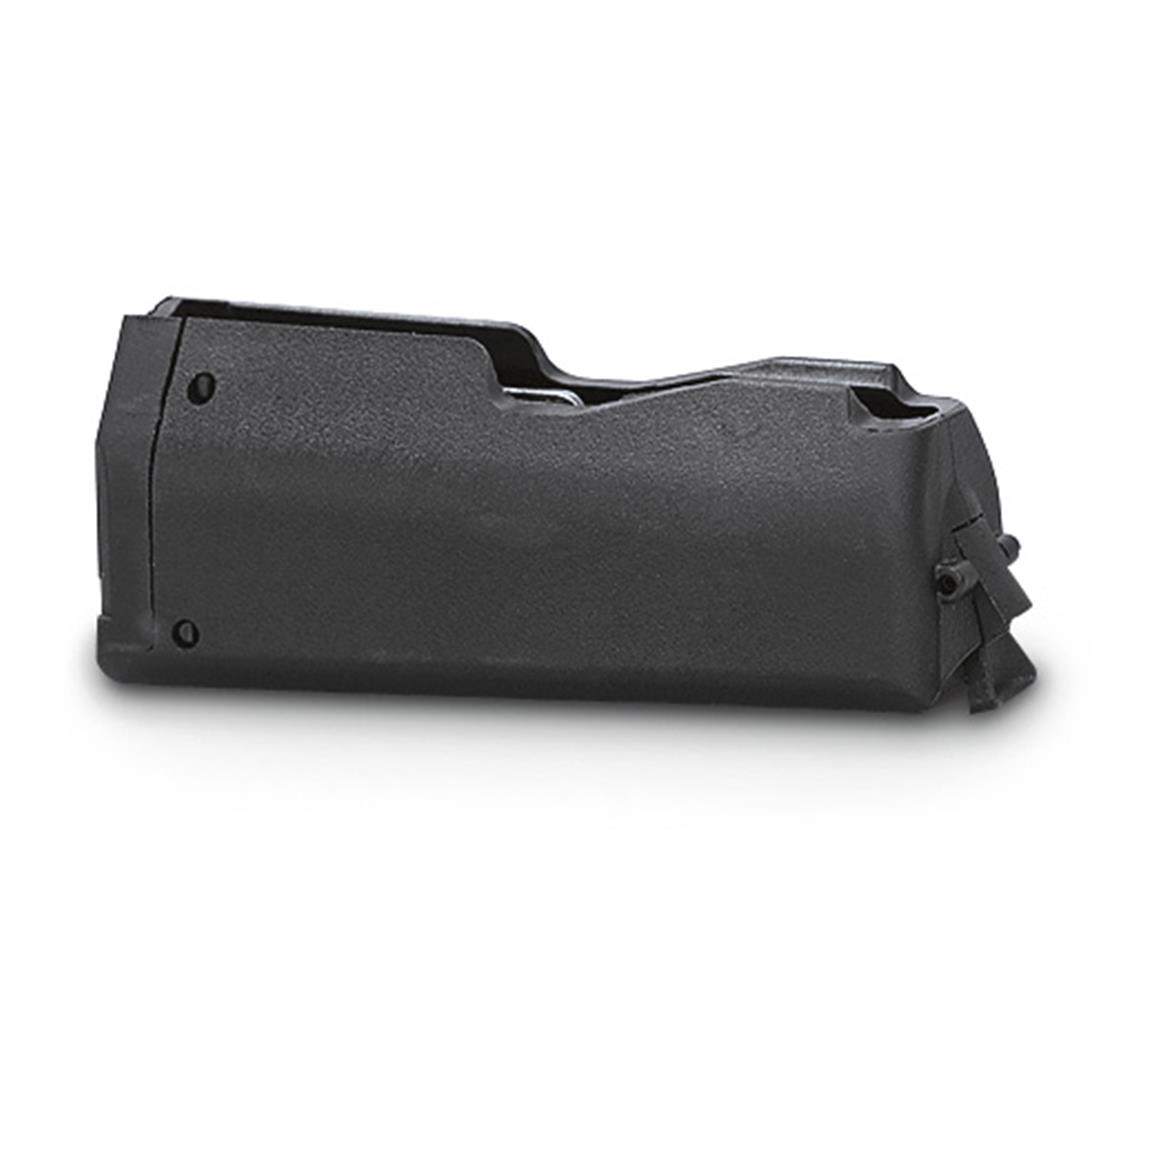 Ruger American Short Action Rifle, .223 Caliber Magazine, 5 Rounds